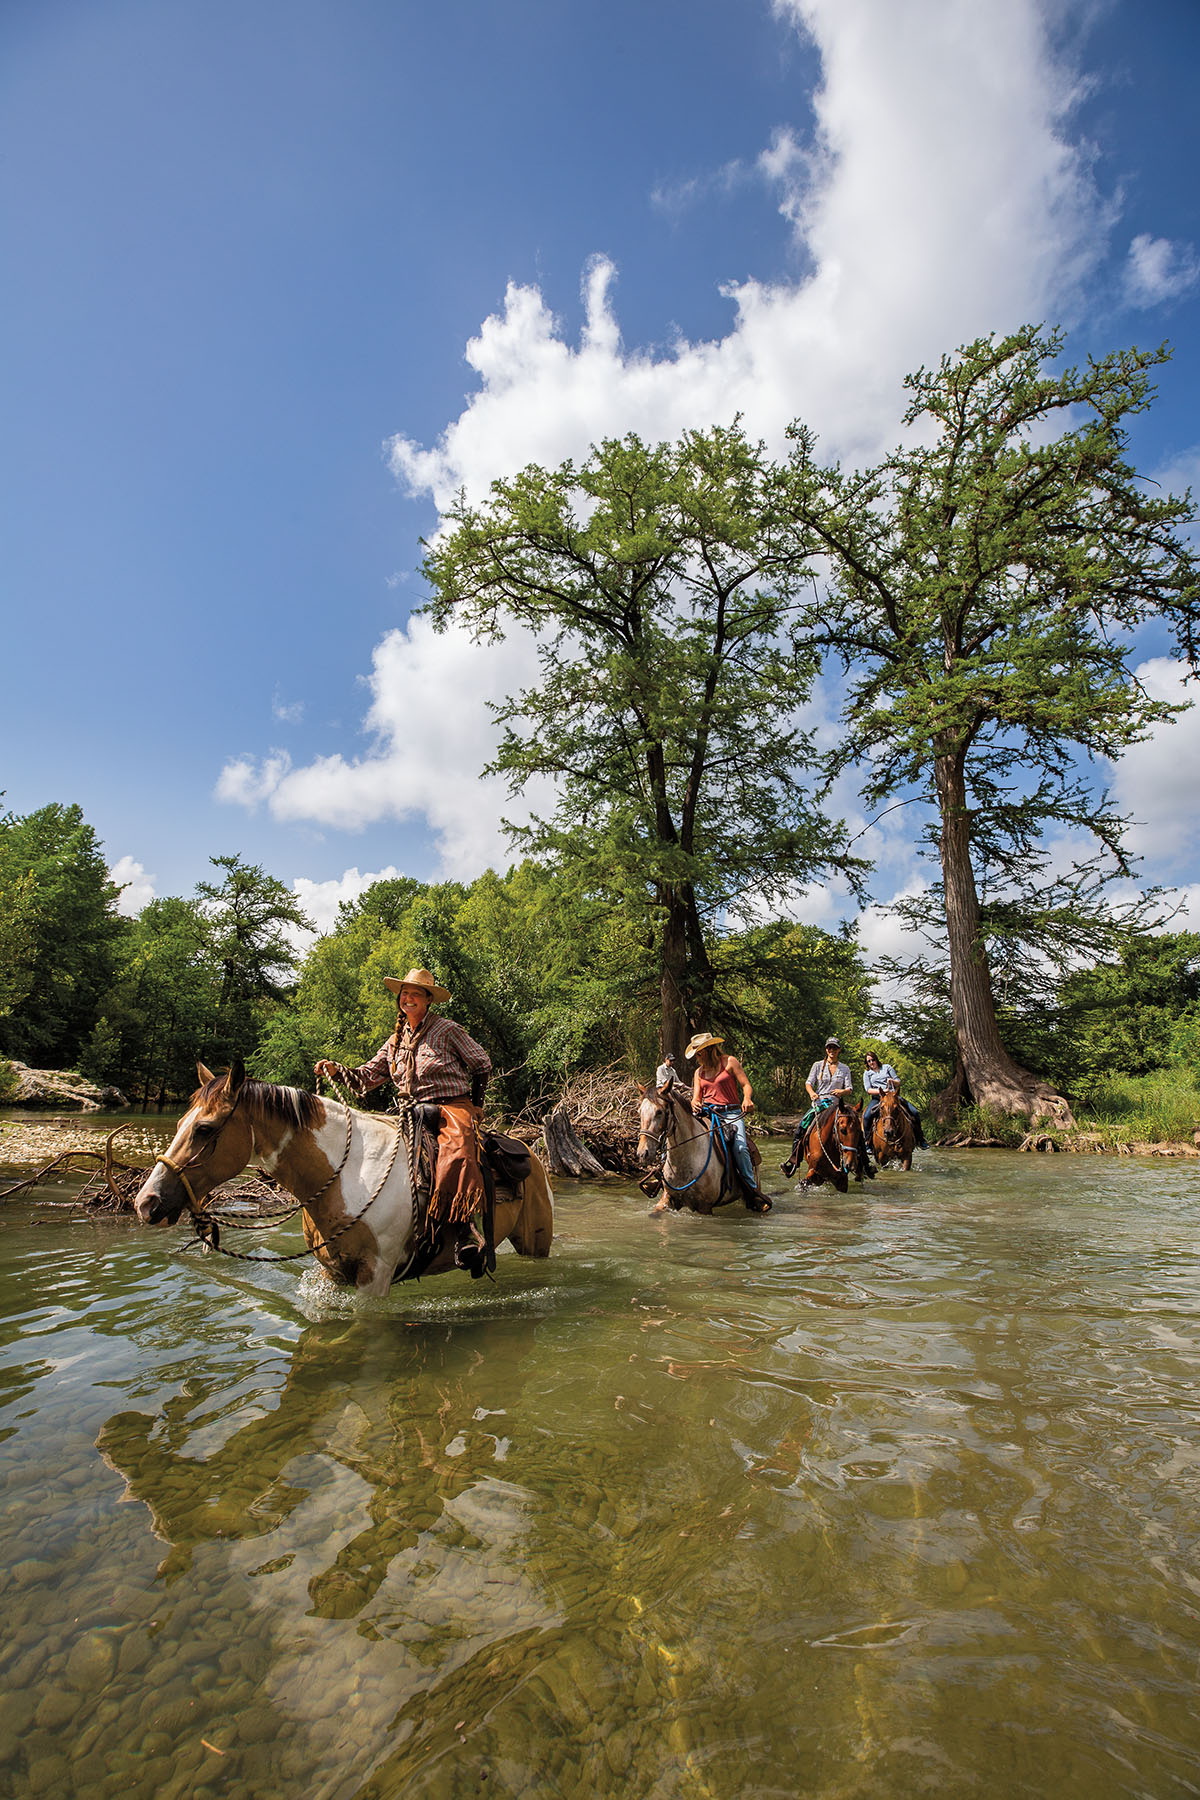 A group of people smile as they ride horses through water under bright blue sky